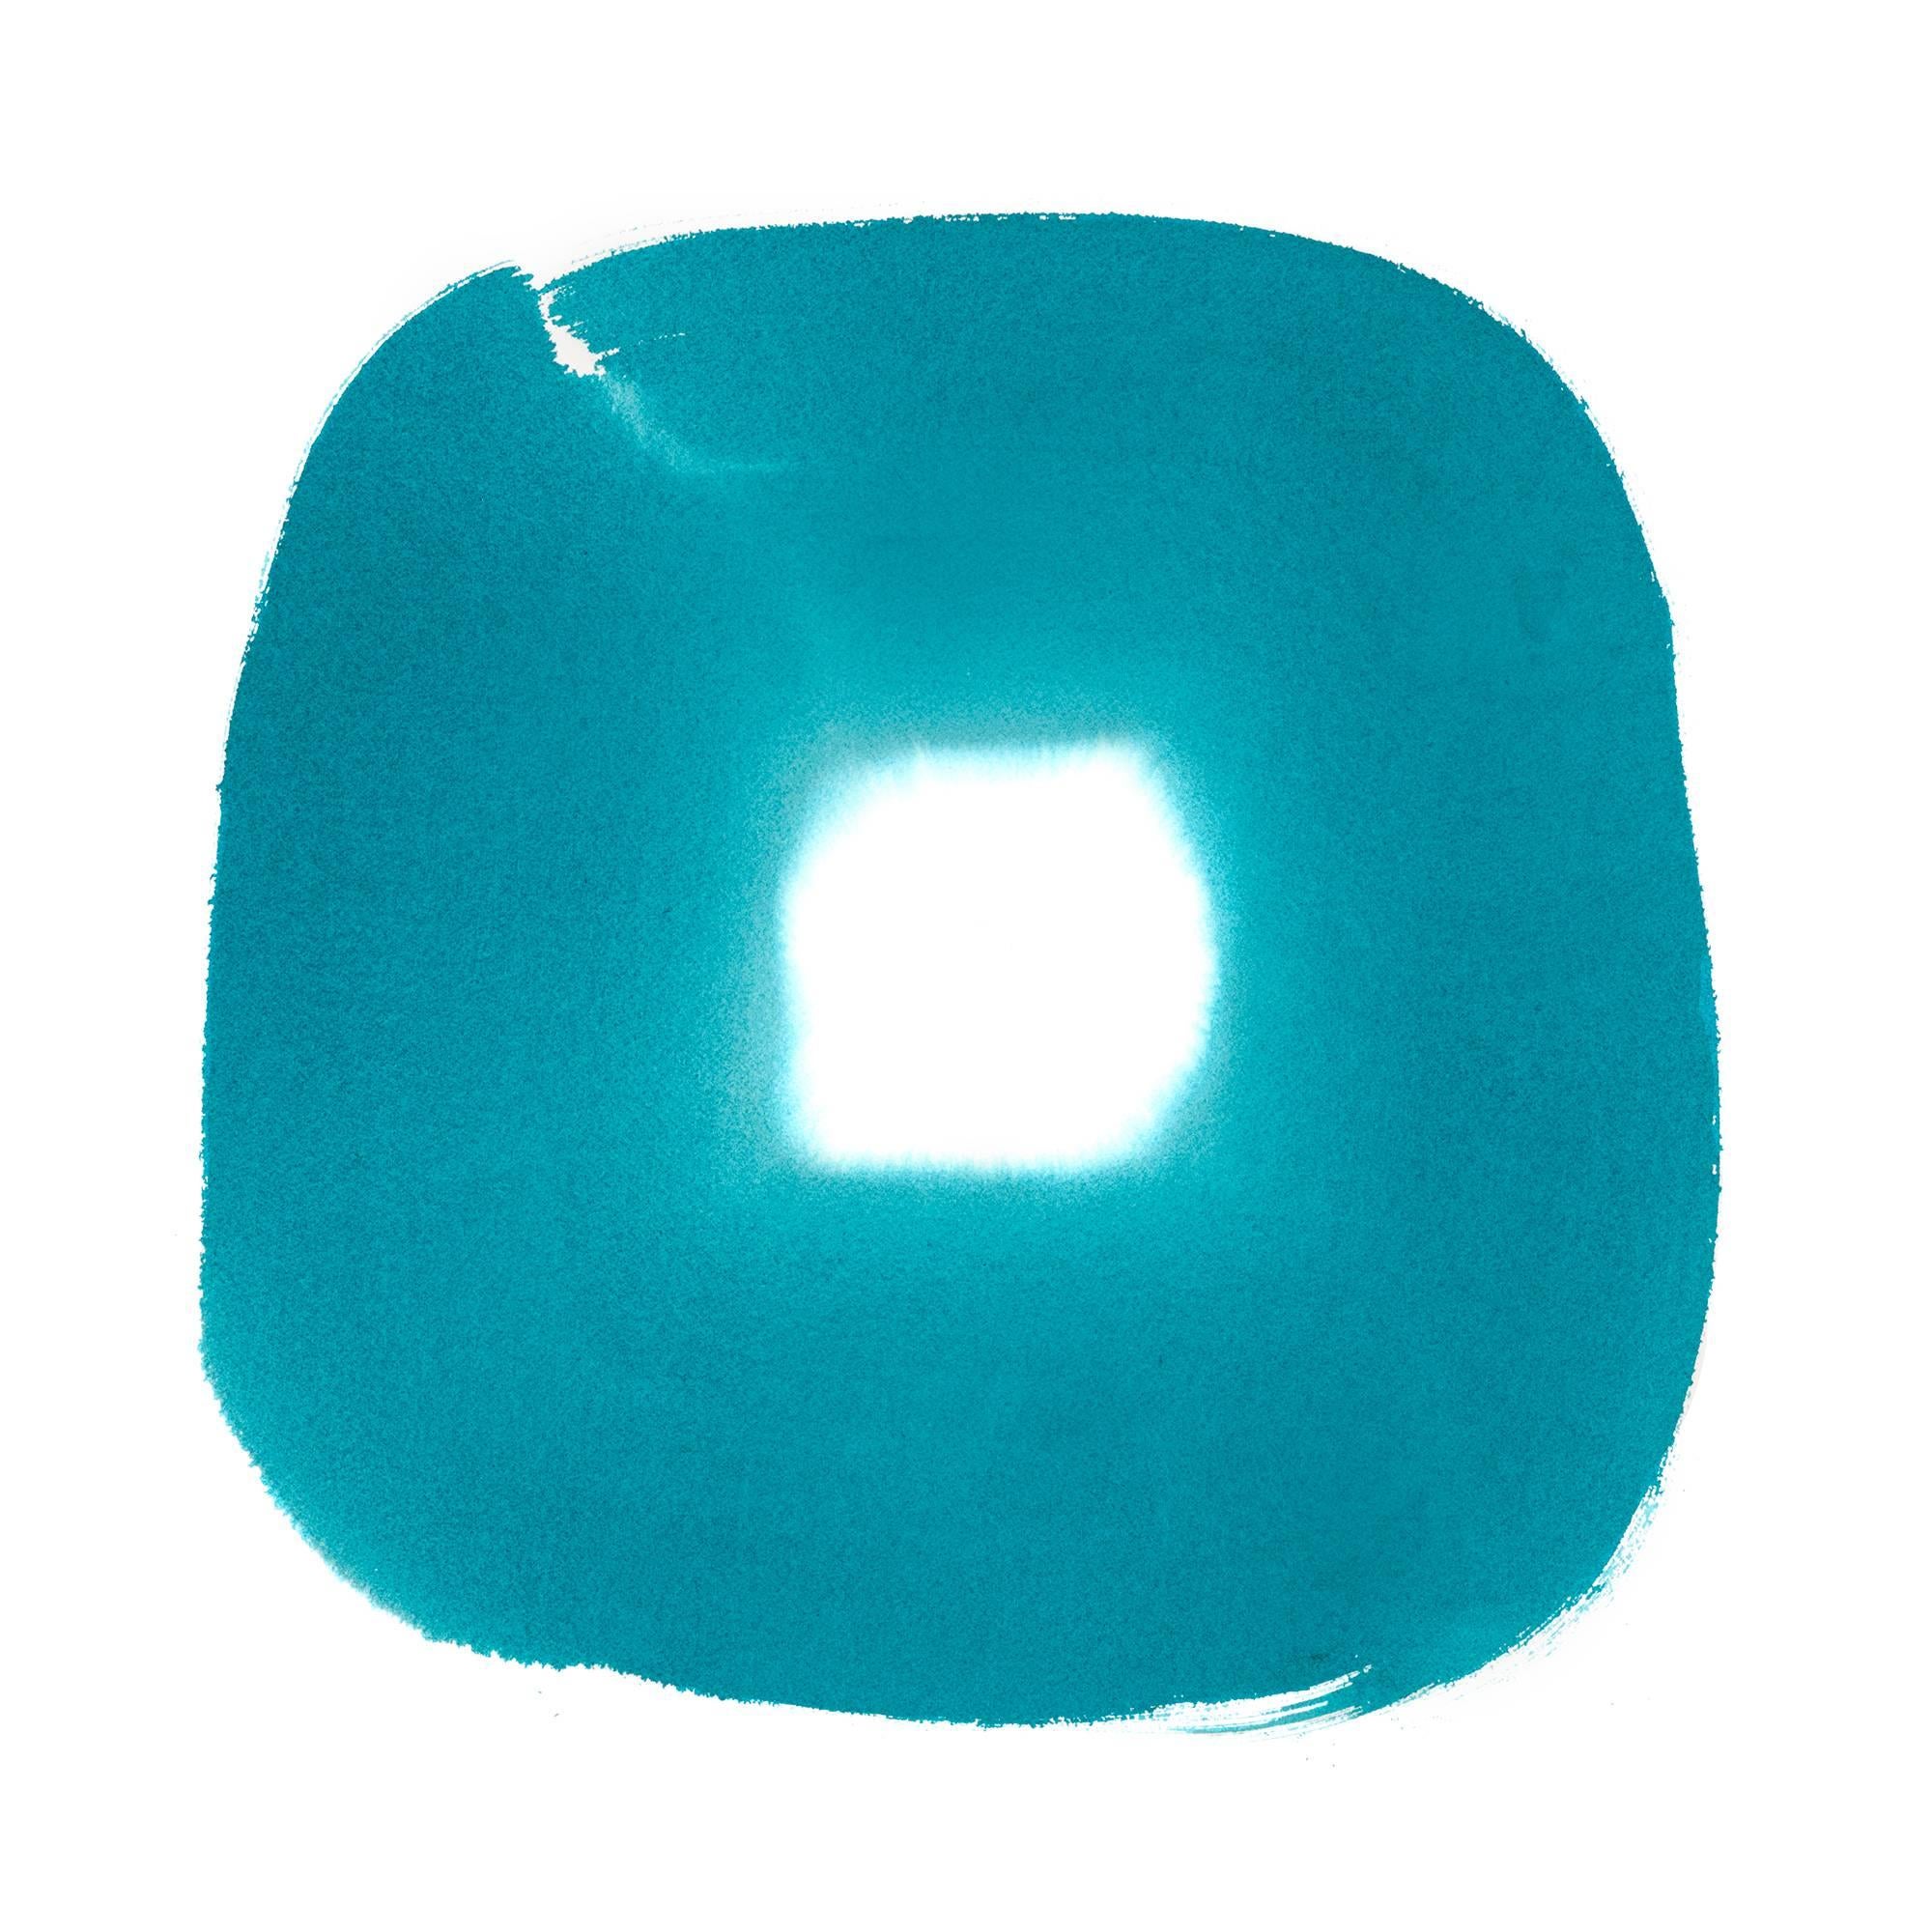 Véronique Gambier Abstract Print - Aperture in Turquoise XXVII_Edition of 20